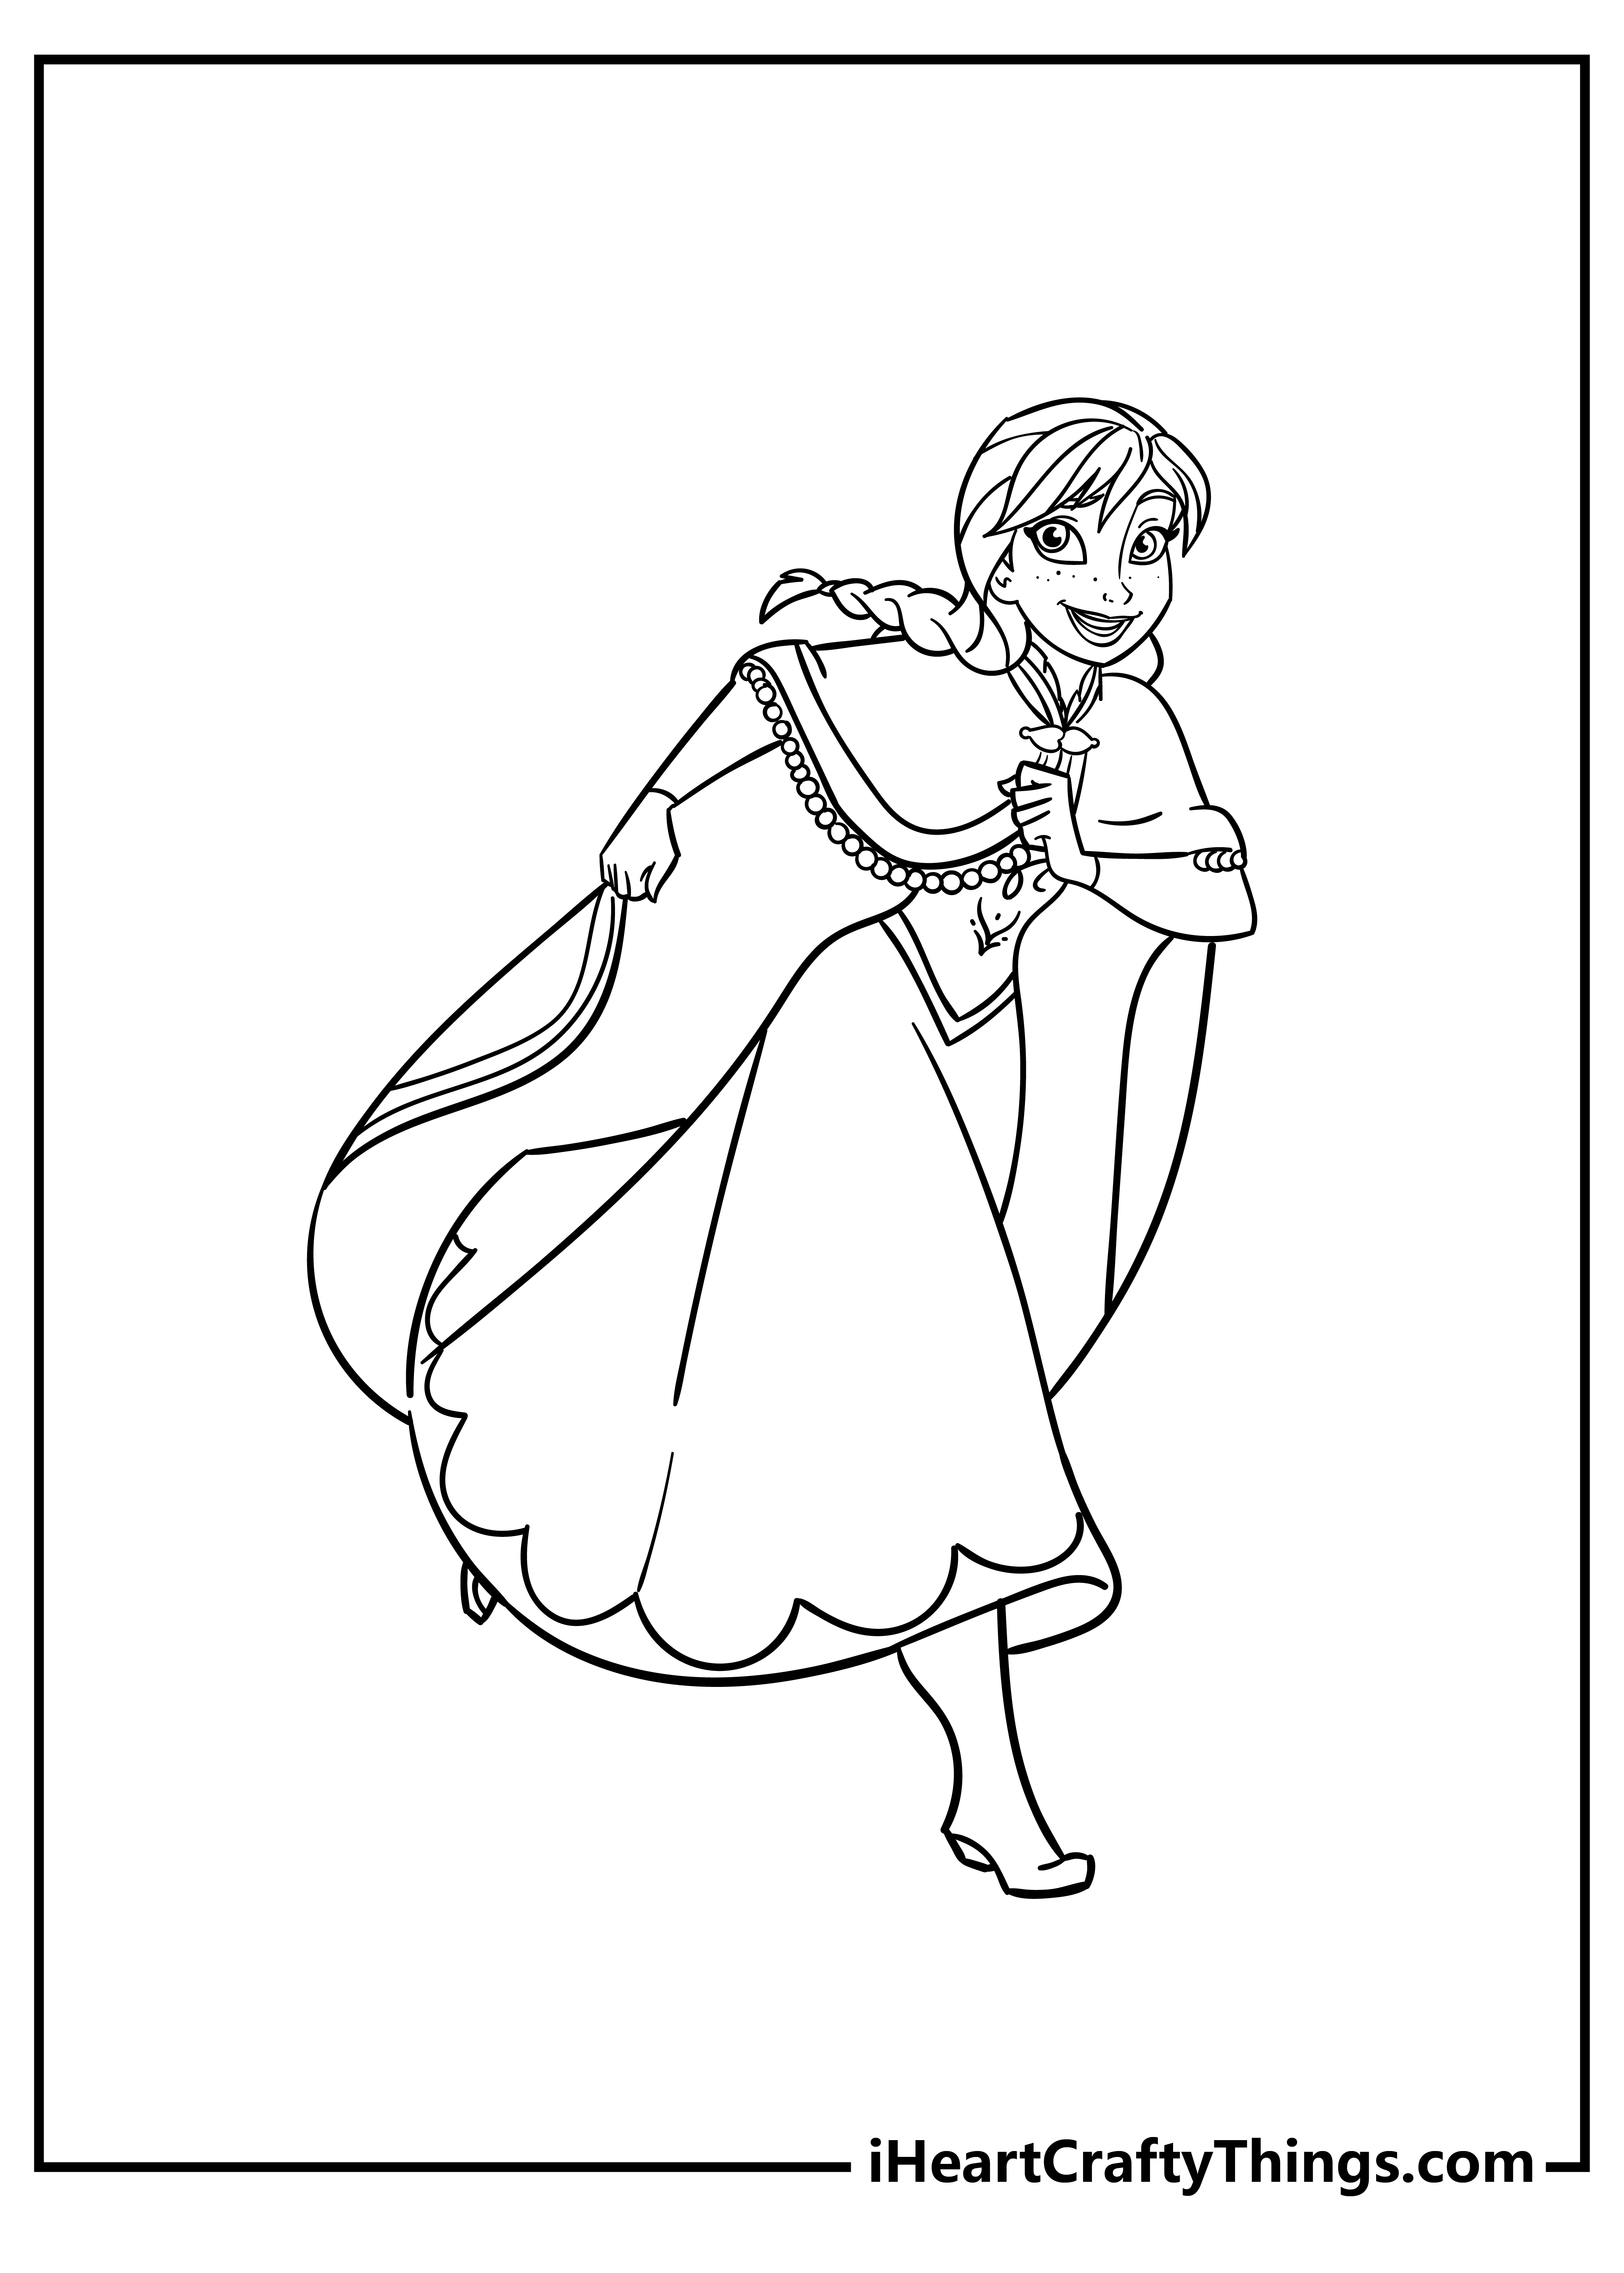 Anna Coloring Pages free pdf download